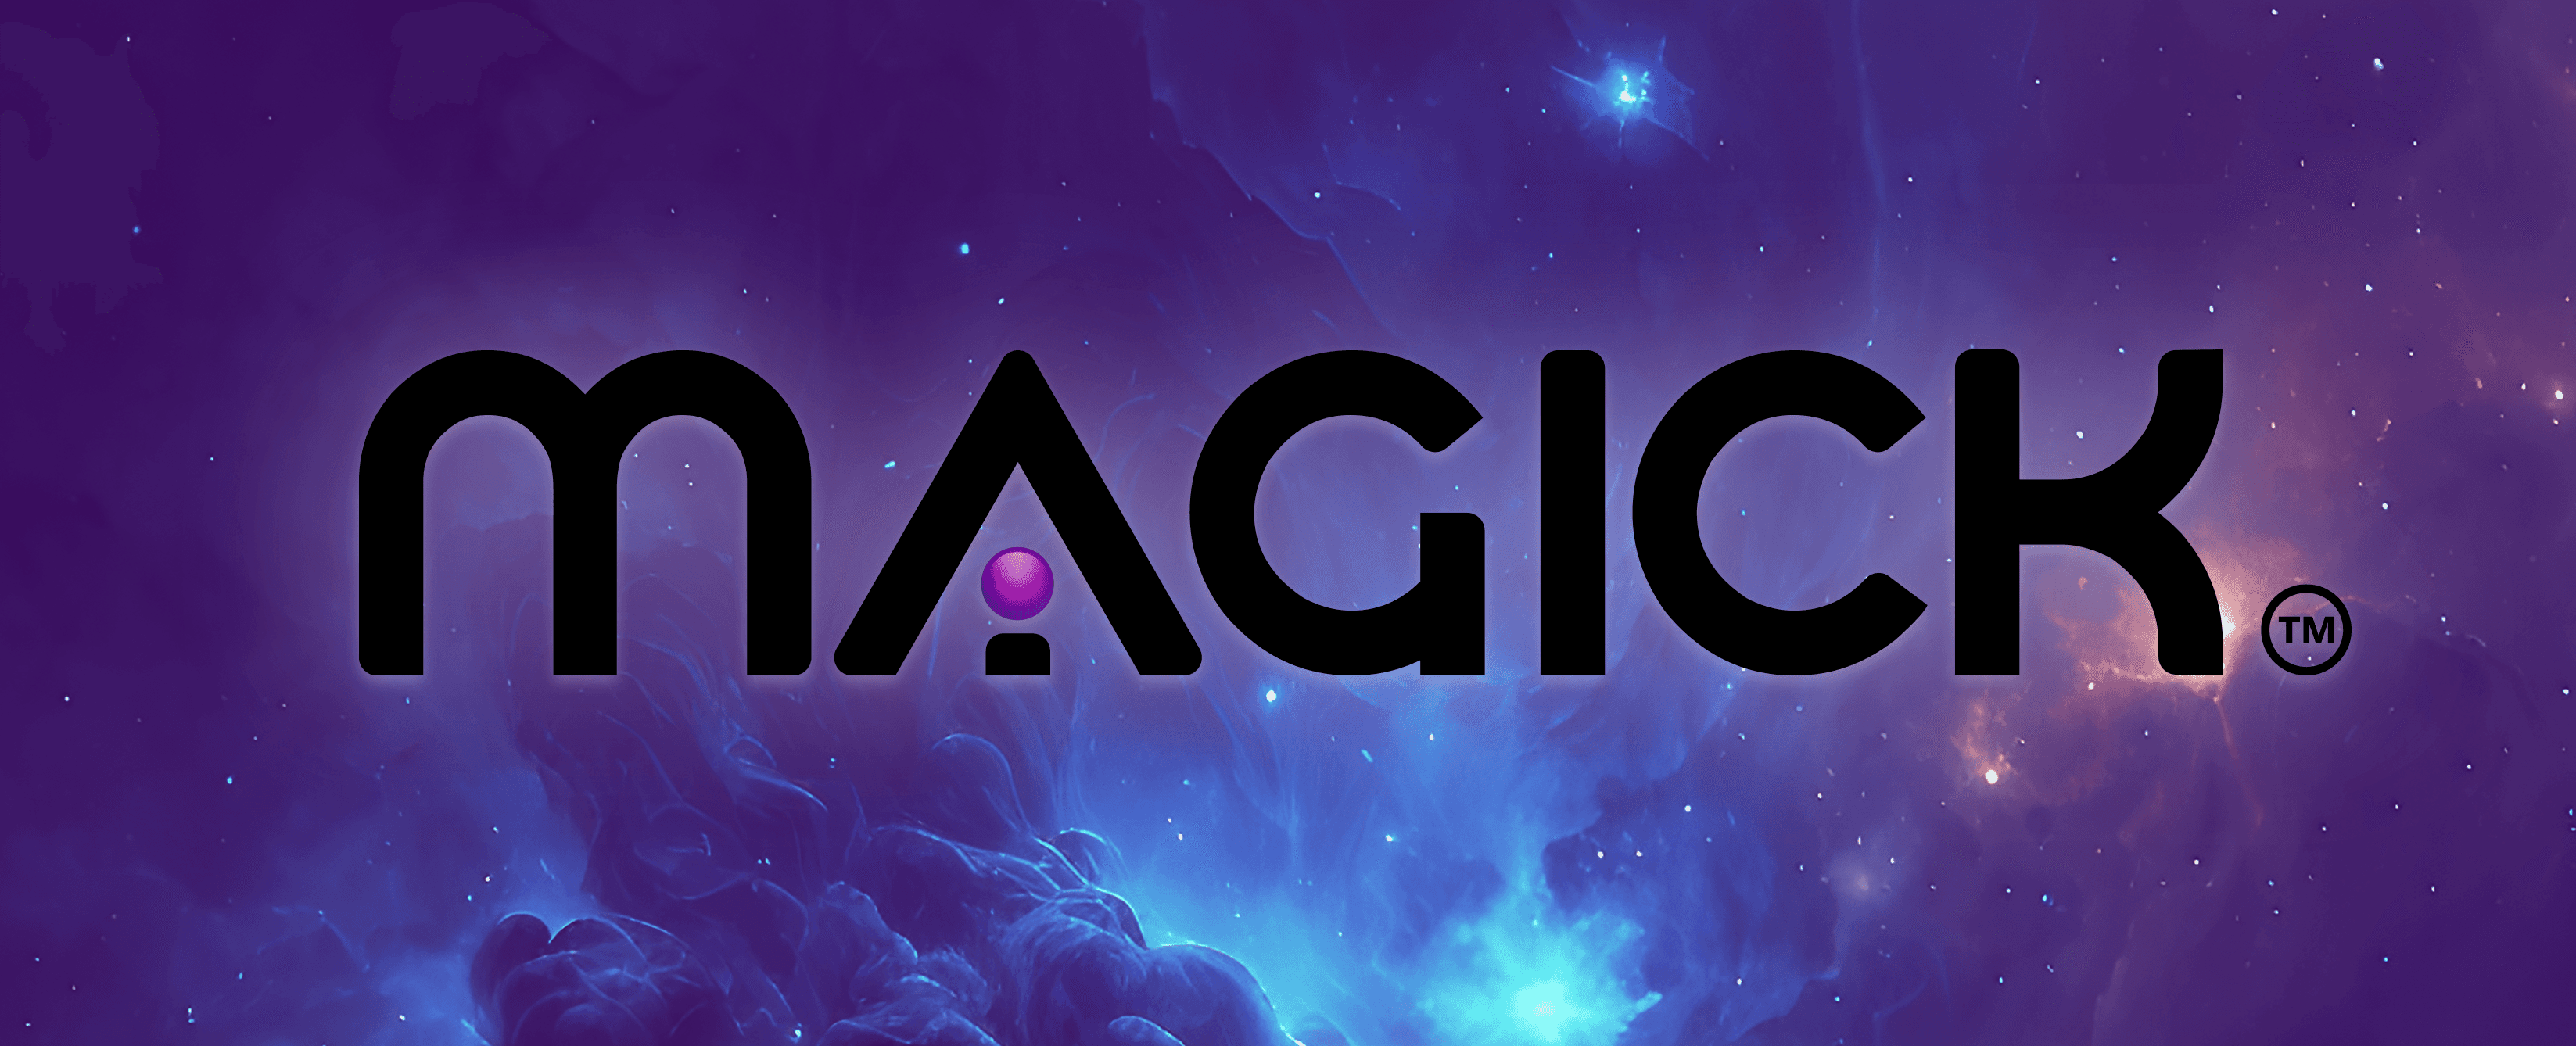 Magick - A platform to build applications without coding